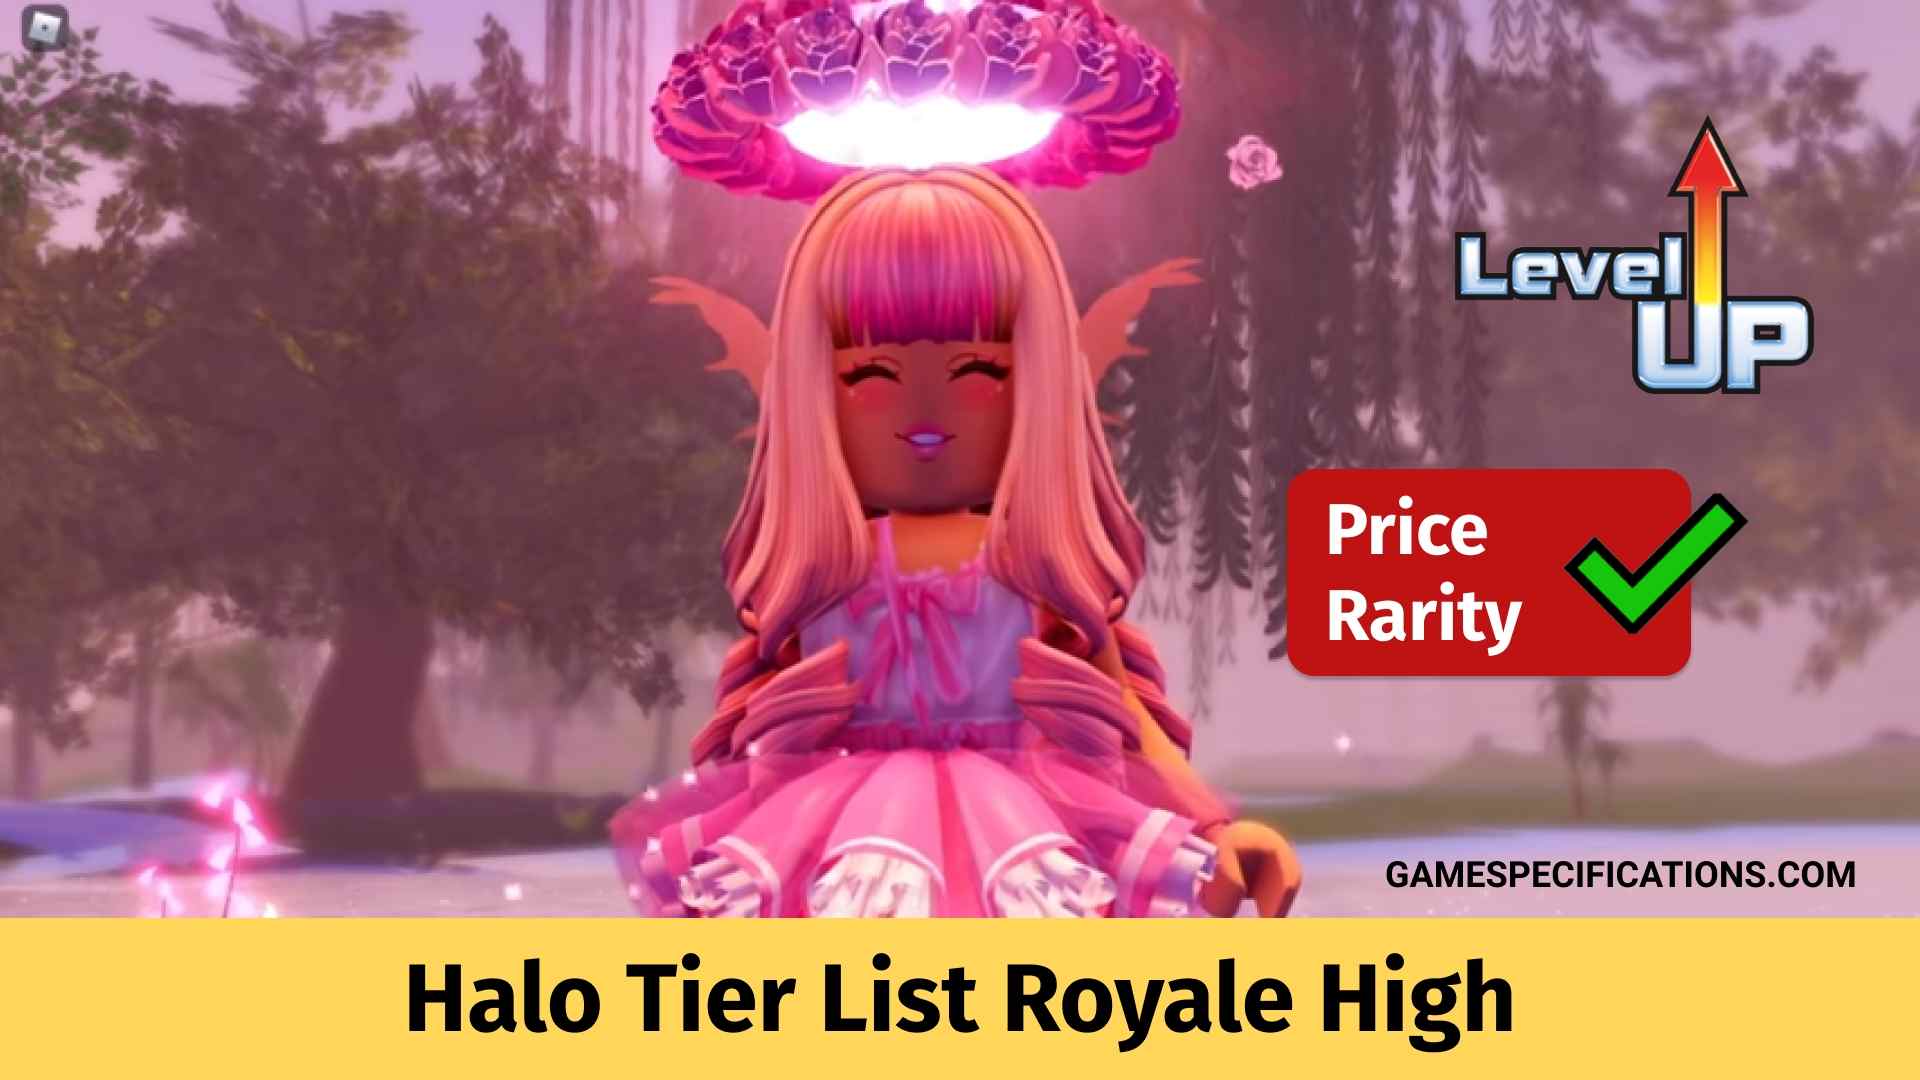 Top Halo Tier List Royale High Based On Rarity 2021 Game Specifications - how to get dark halo in roblox